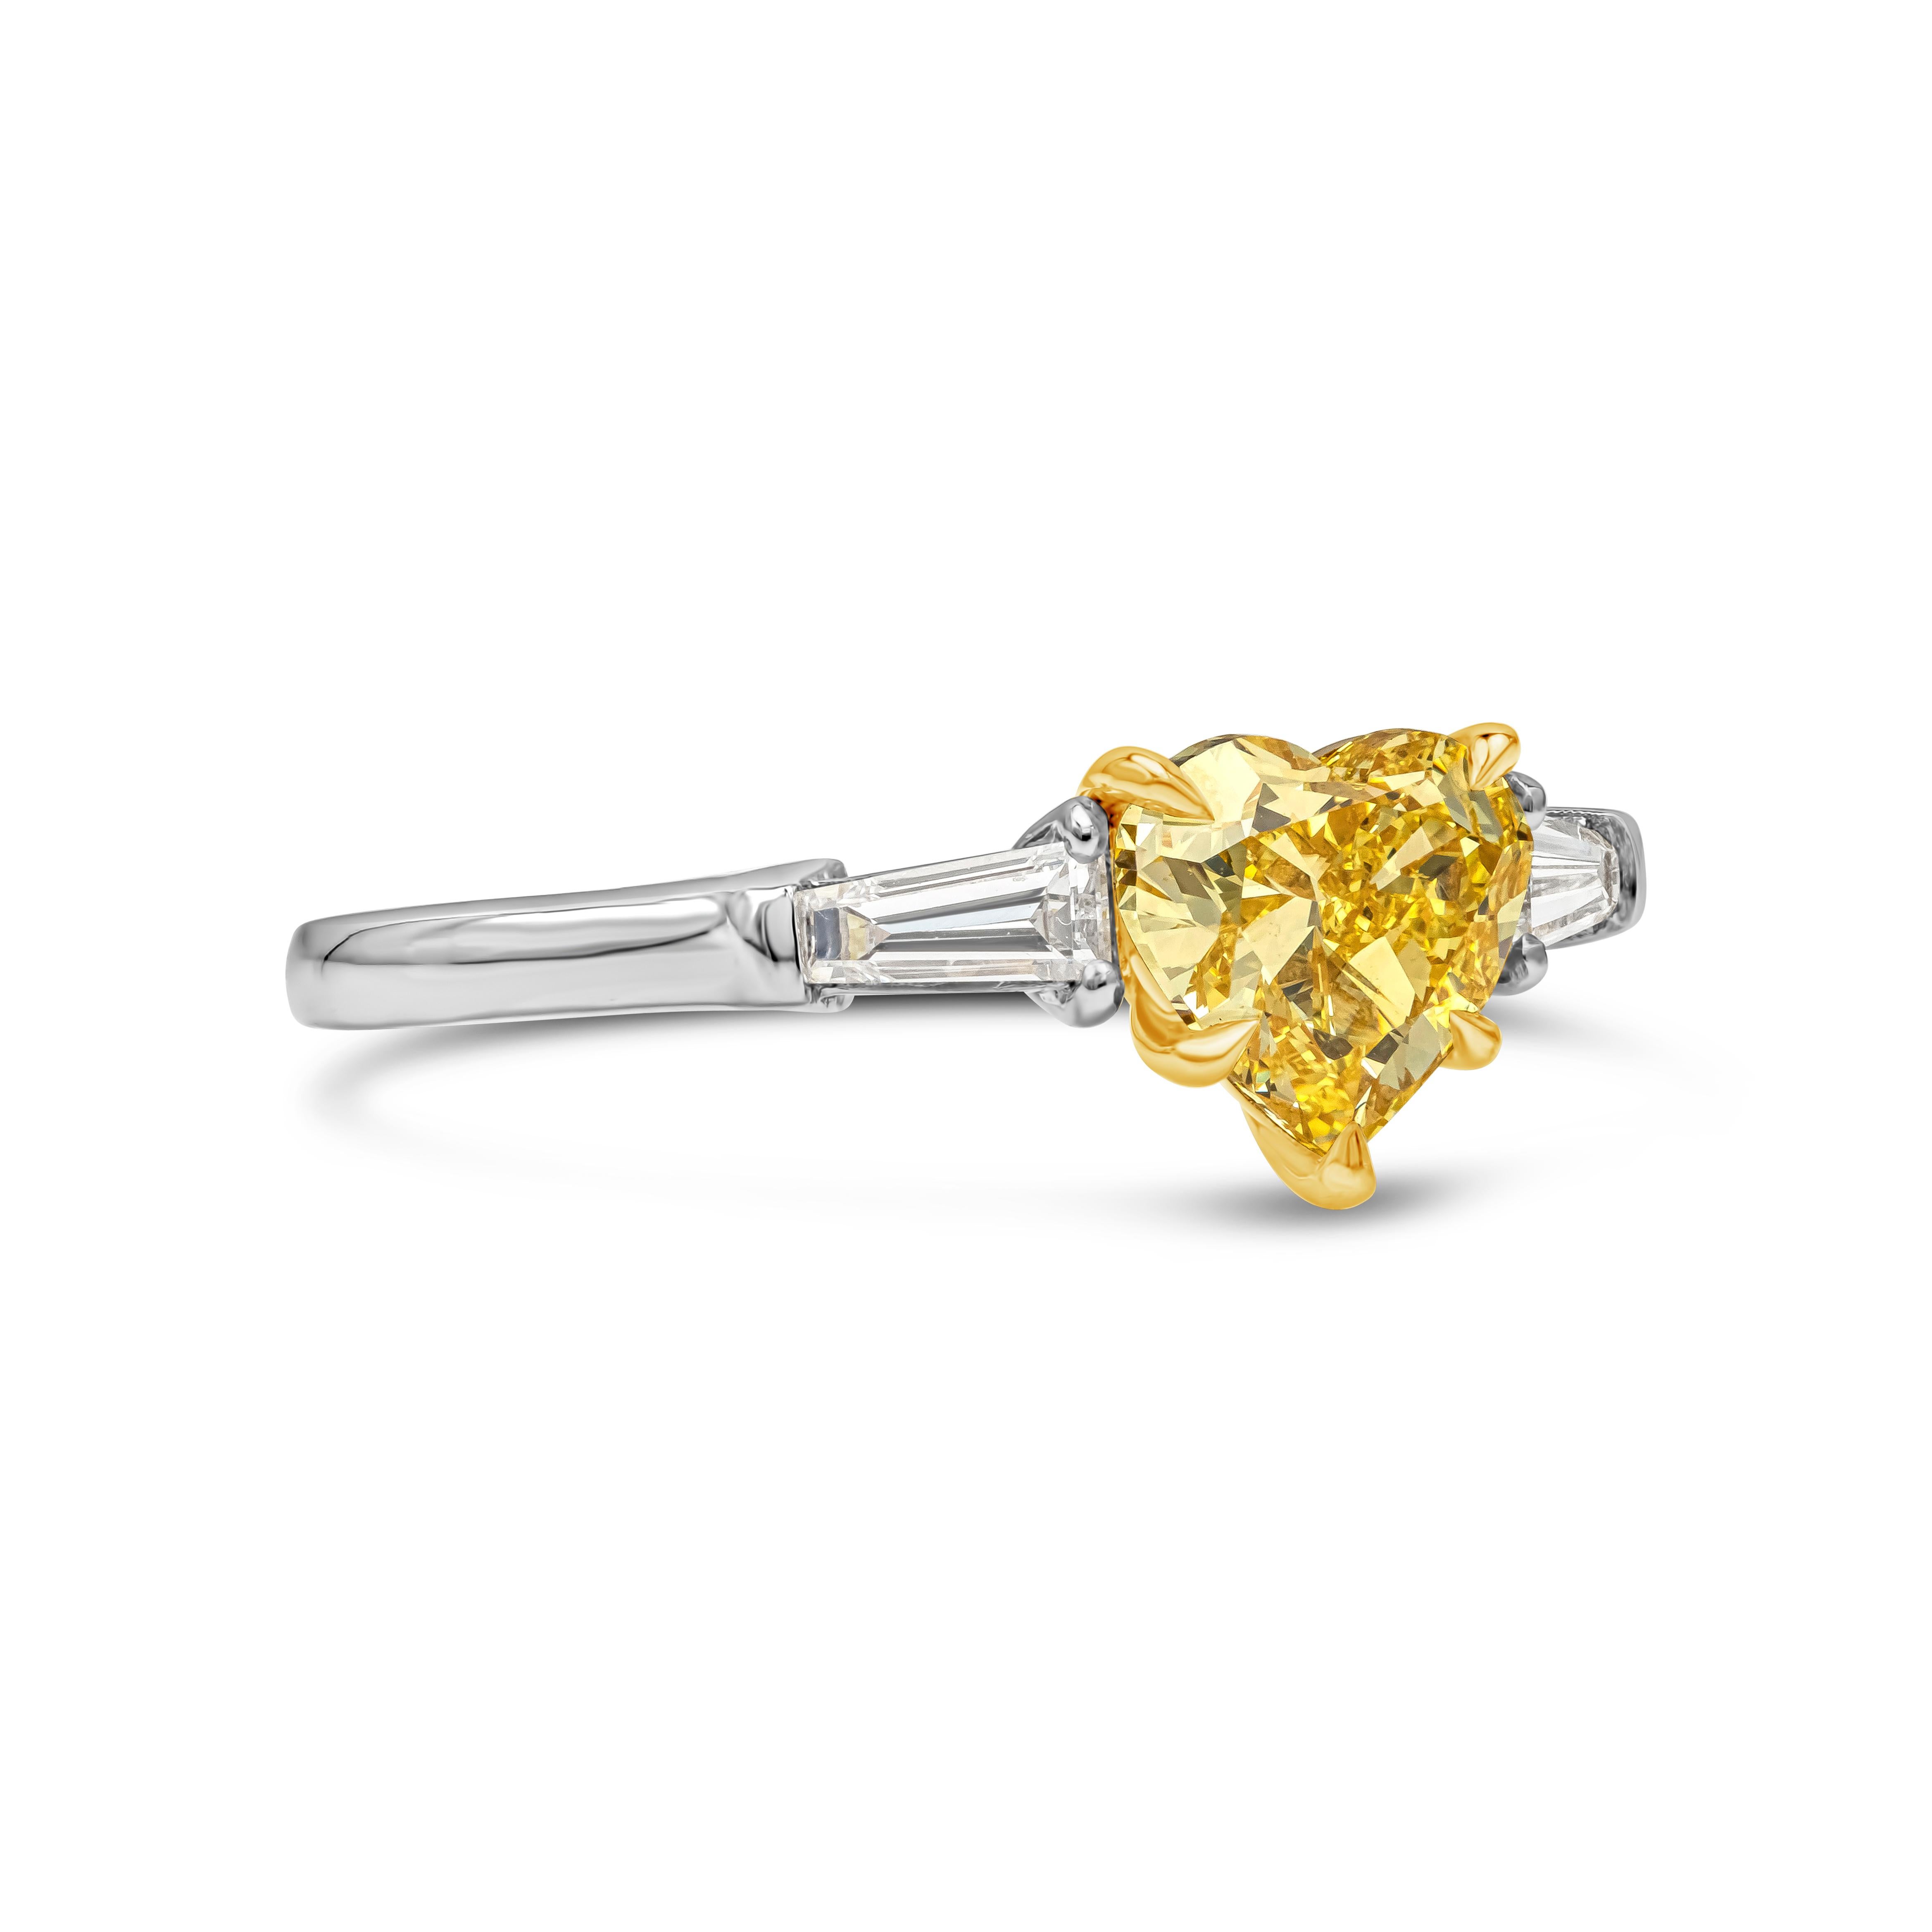 A unique and color-rich three-stone engagement ring design showcasing a 1.01 carats heart shape yellow diamond certified by GIA as Fancy Vivid Yellow color, VS2 in clarity, flanked by tapered baguette diamonds on each side. Accent diamonds weigh